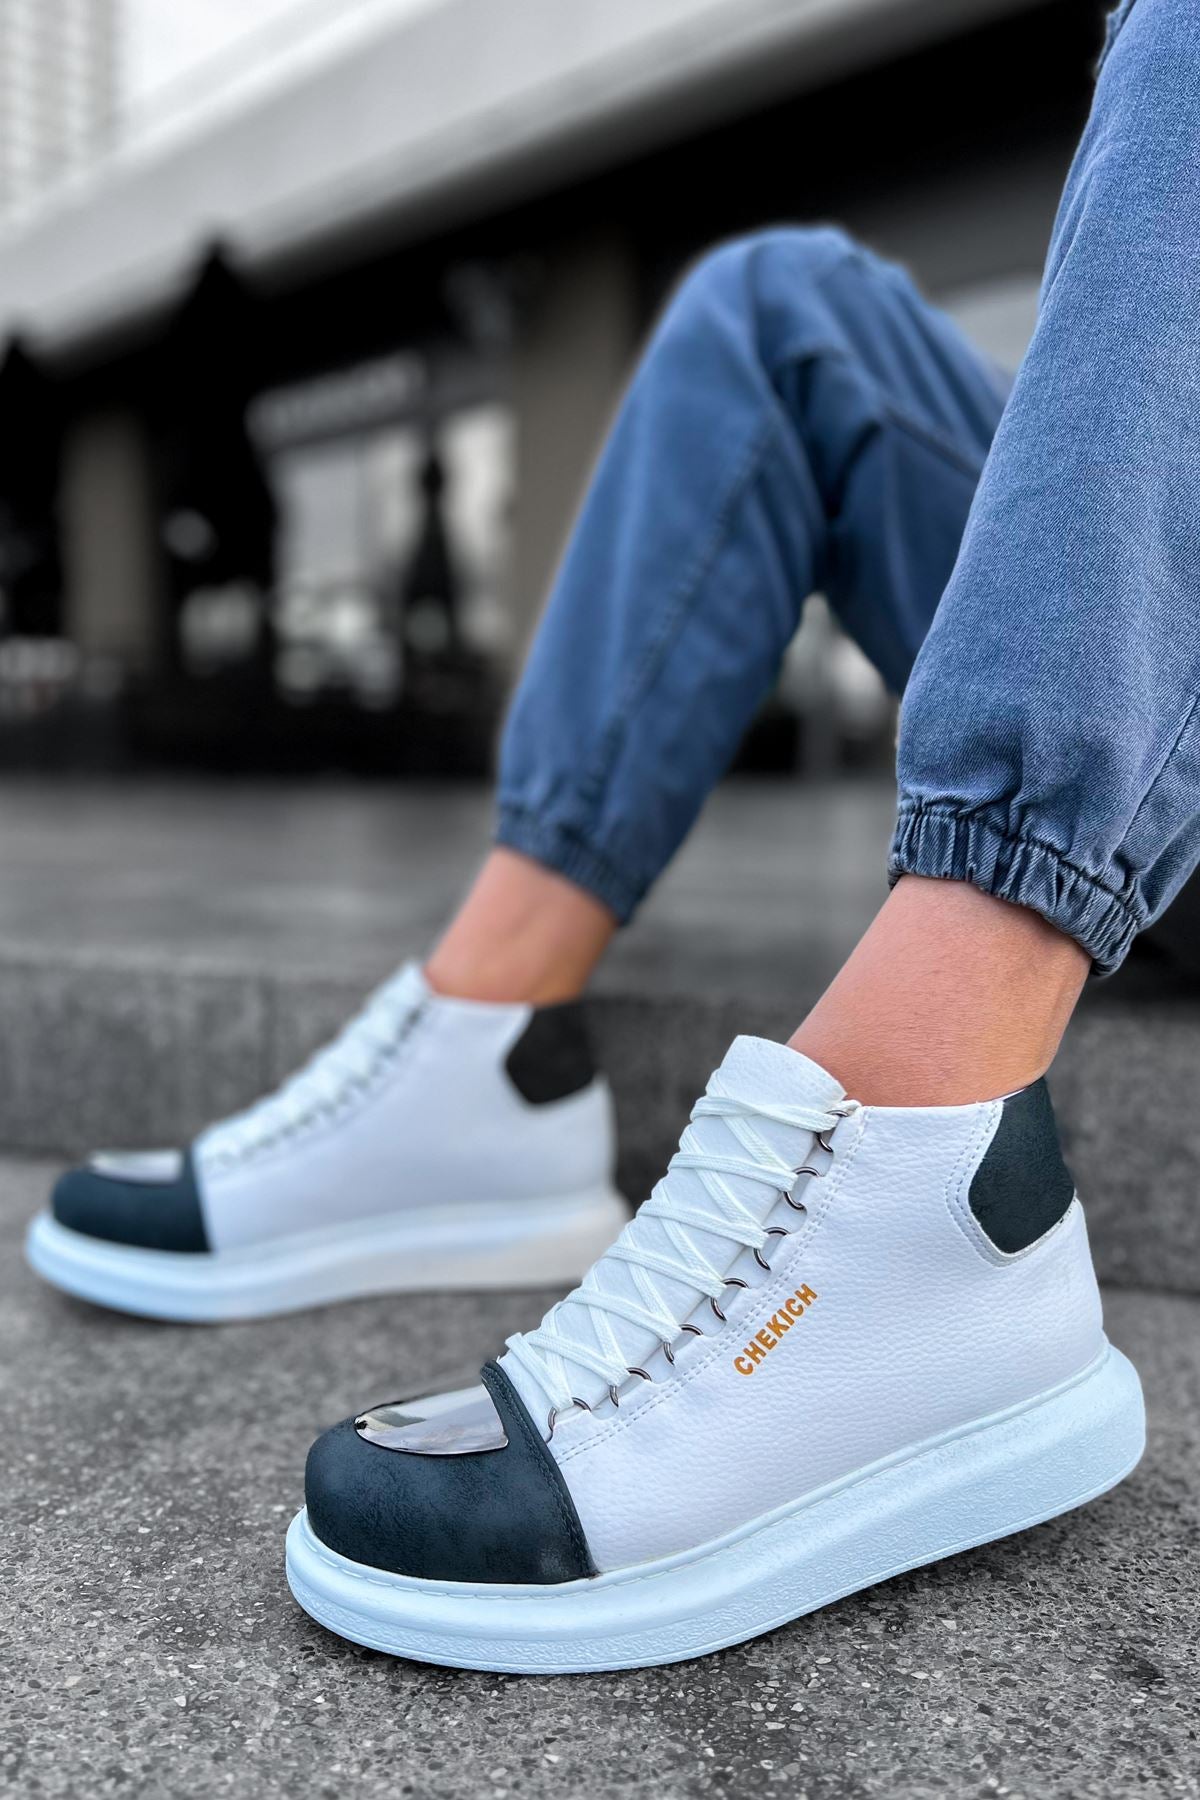 CH267 Men's shoes sneakers Boots WHITE/ANTHRACITE - STREETMODE ™